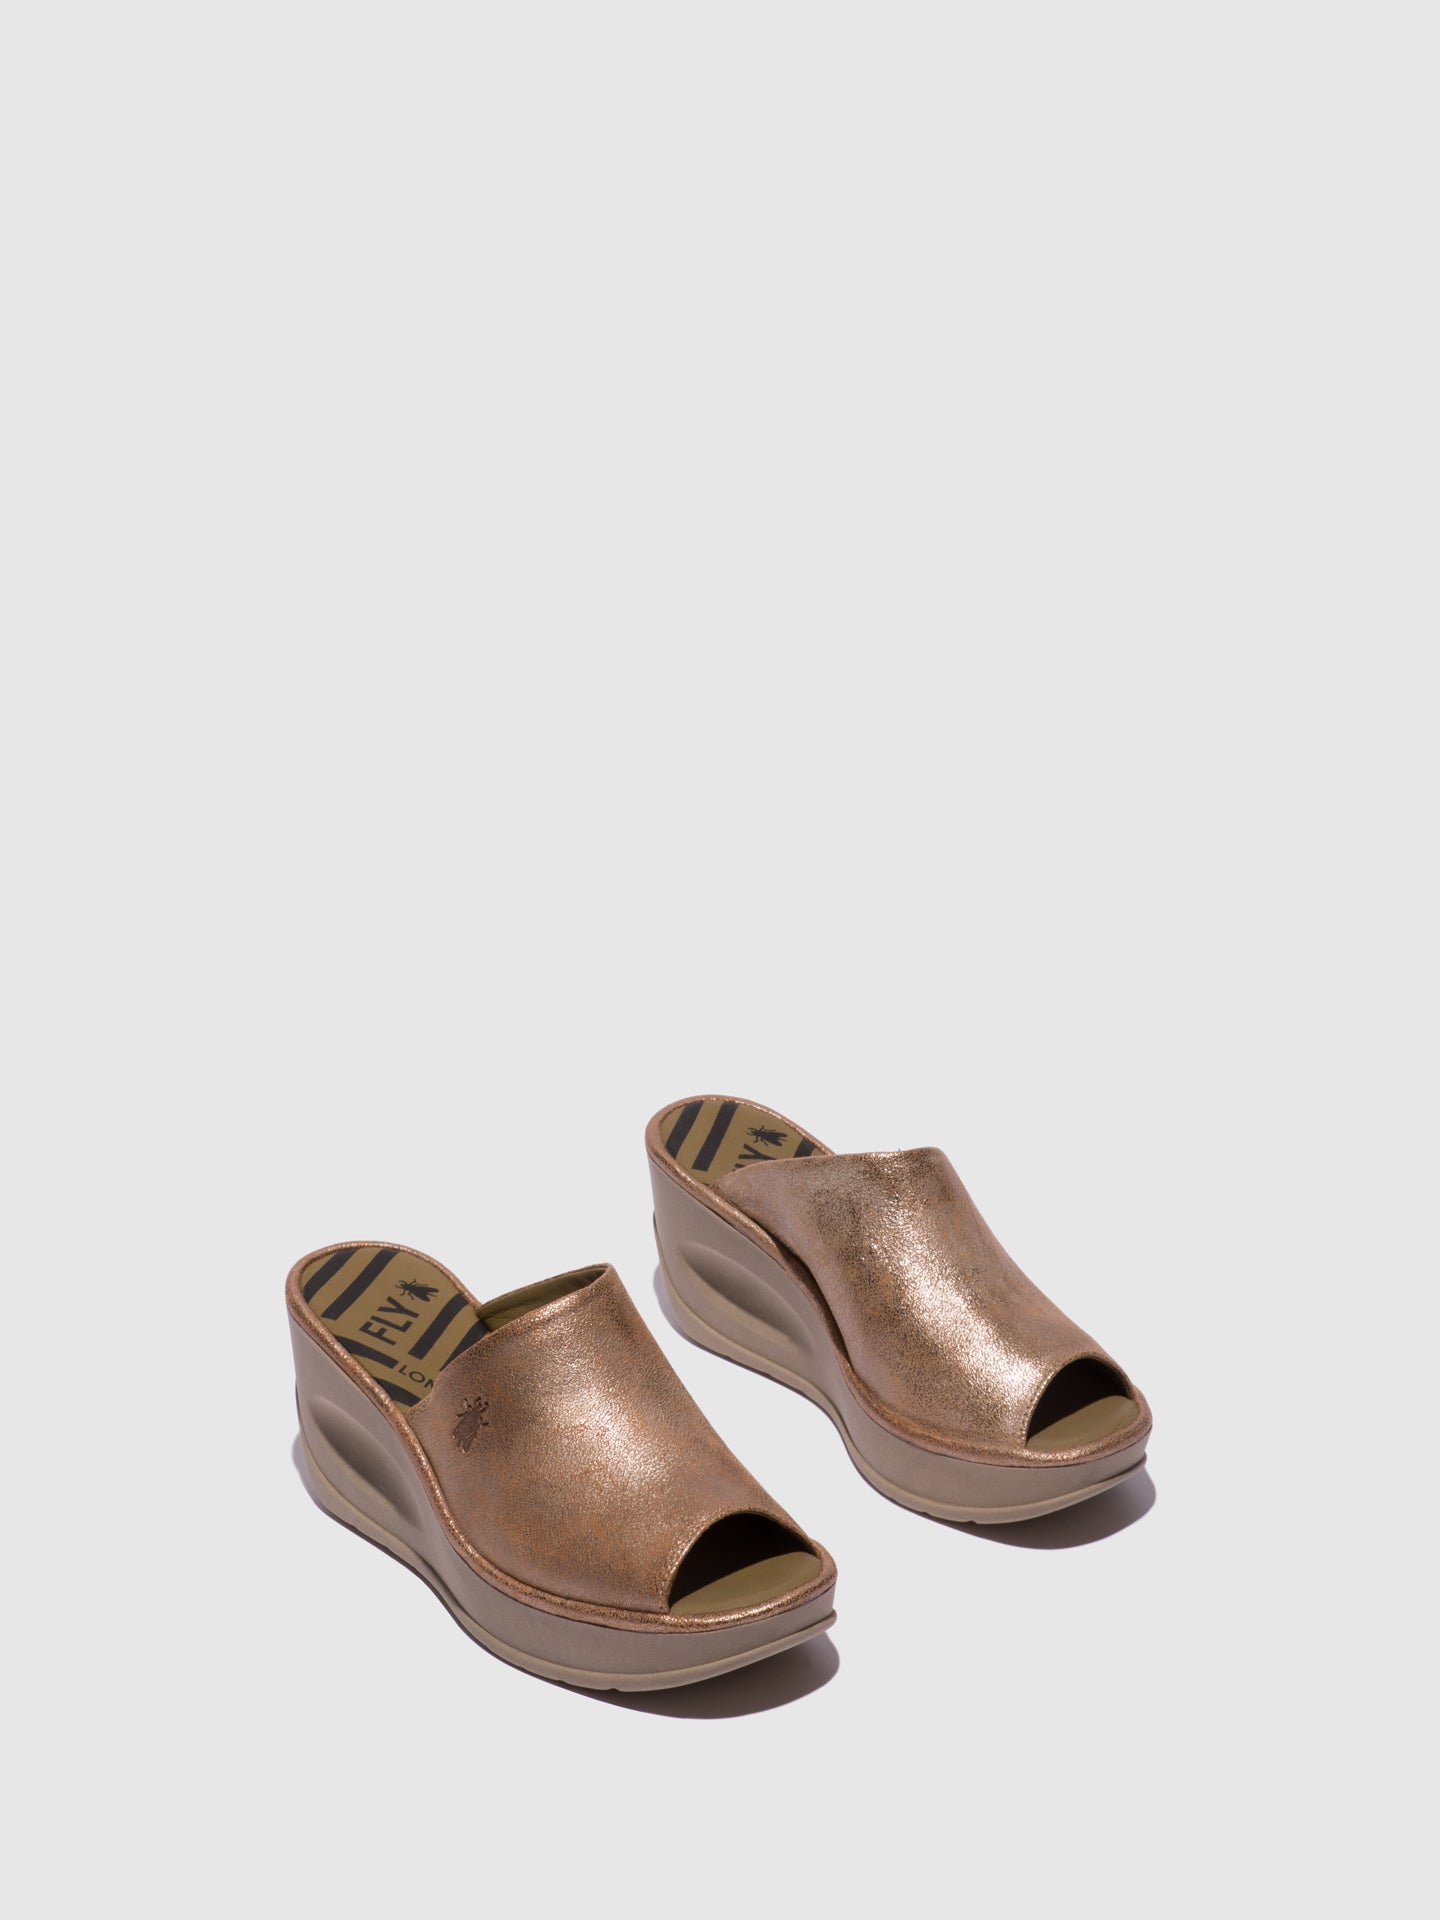 Fly London Gold Wedge Mules